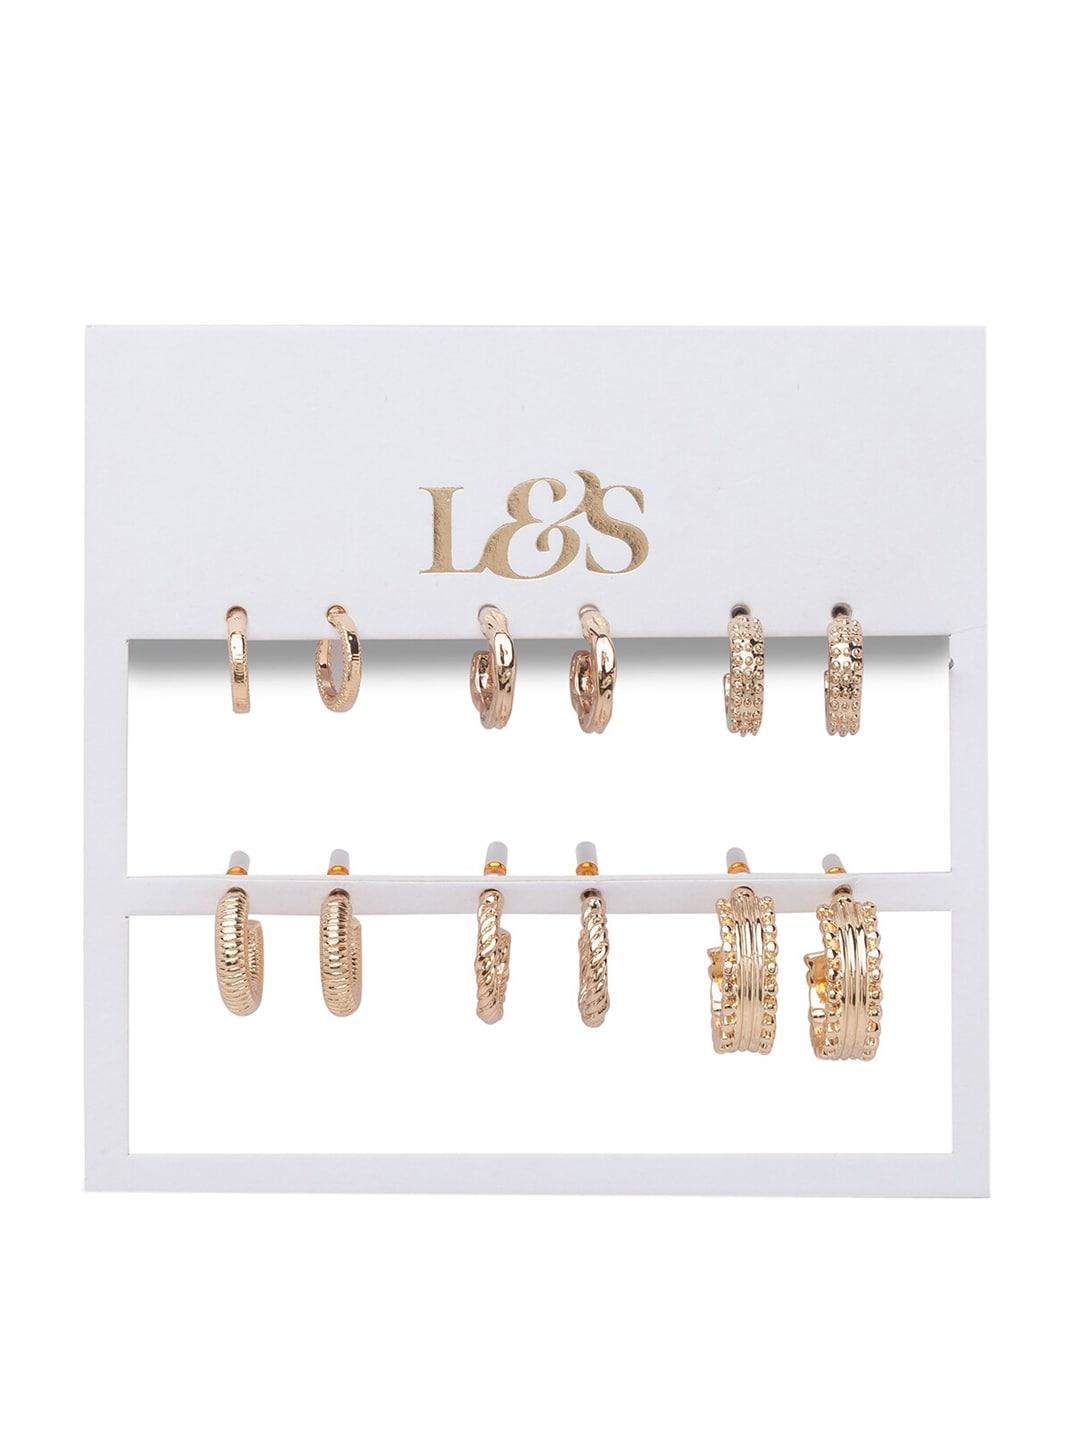 Lilly & sparkle Set of 6 Gold-Toned Contemporary Half Hoop Earrings